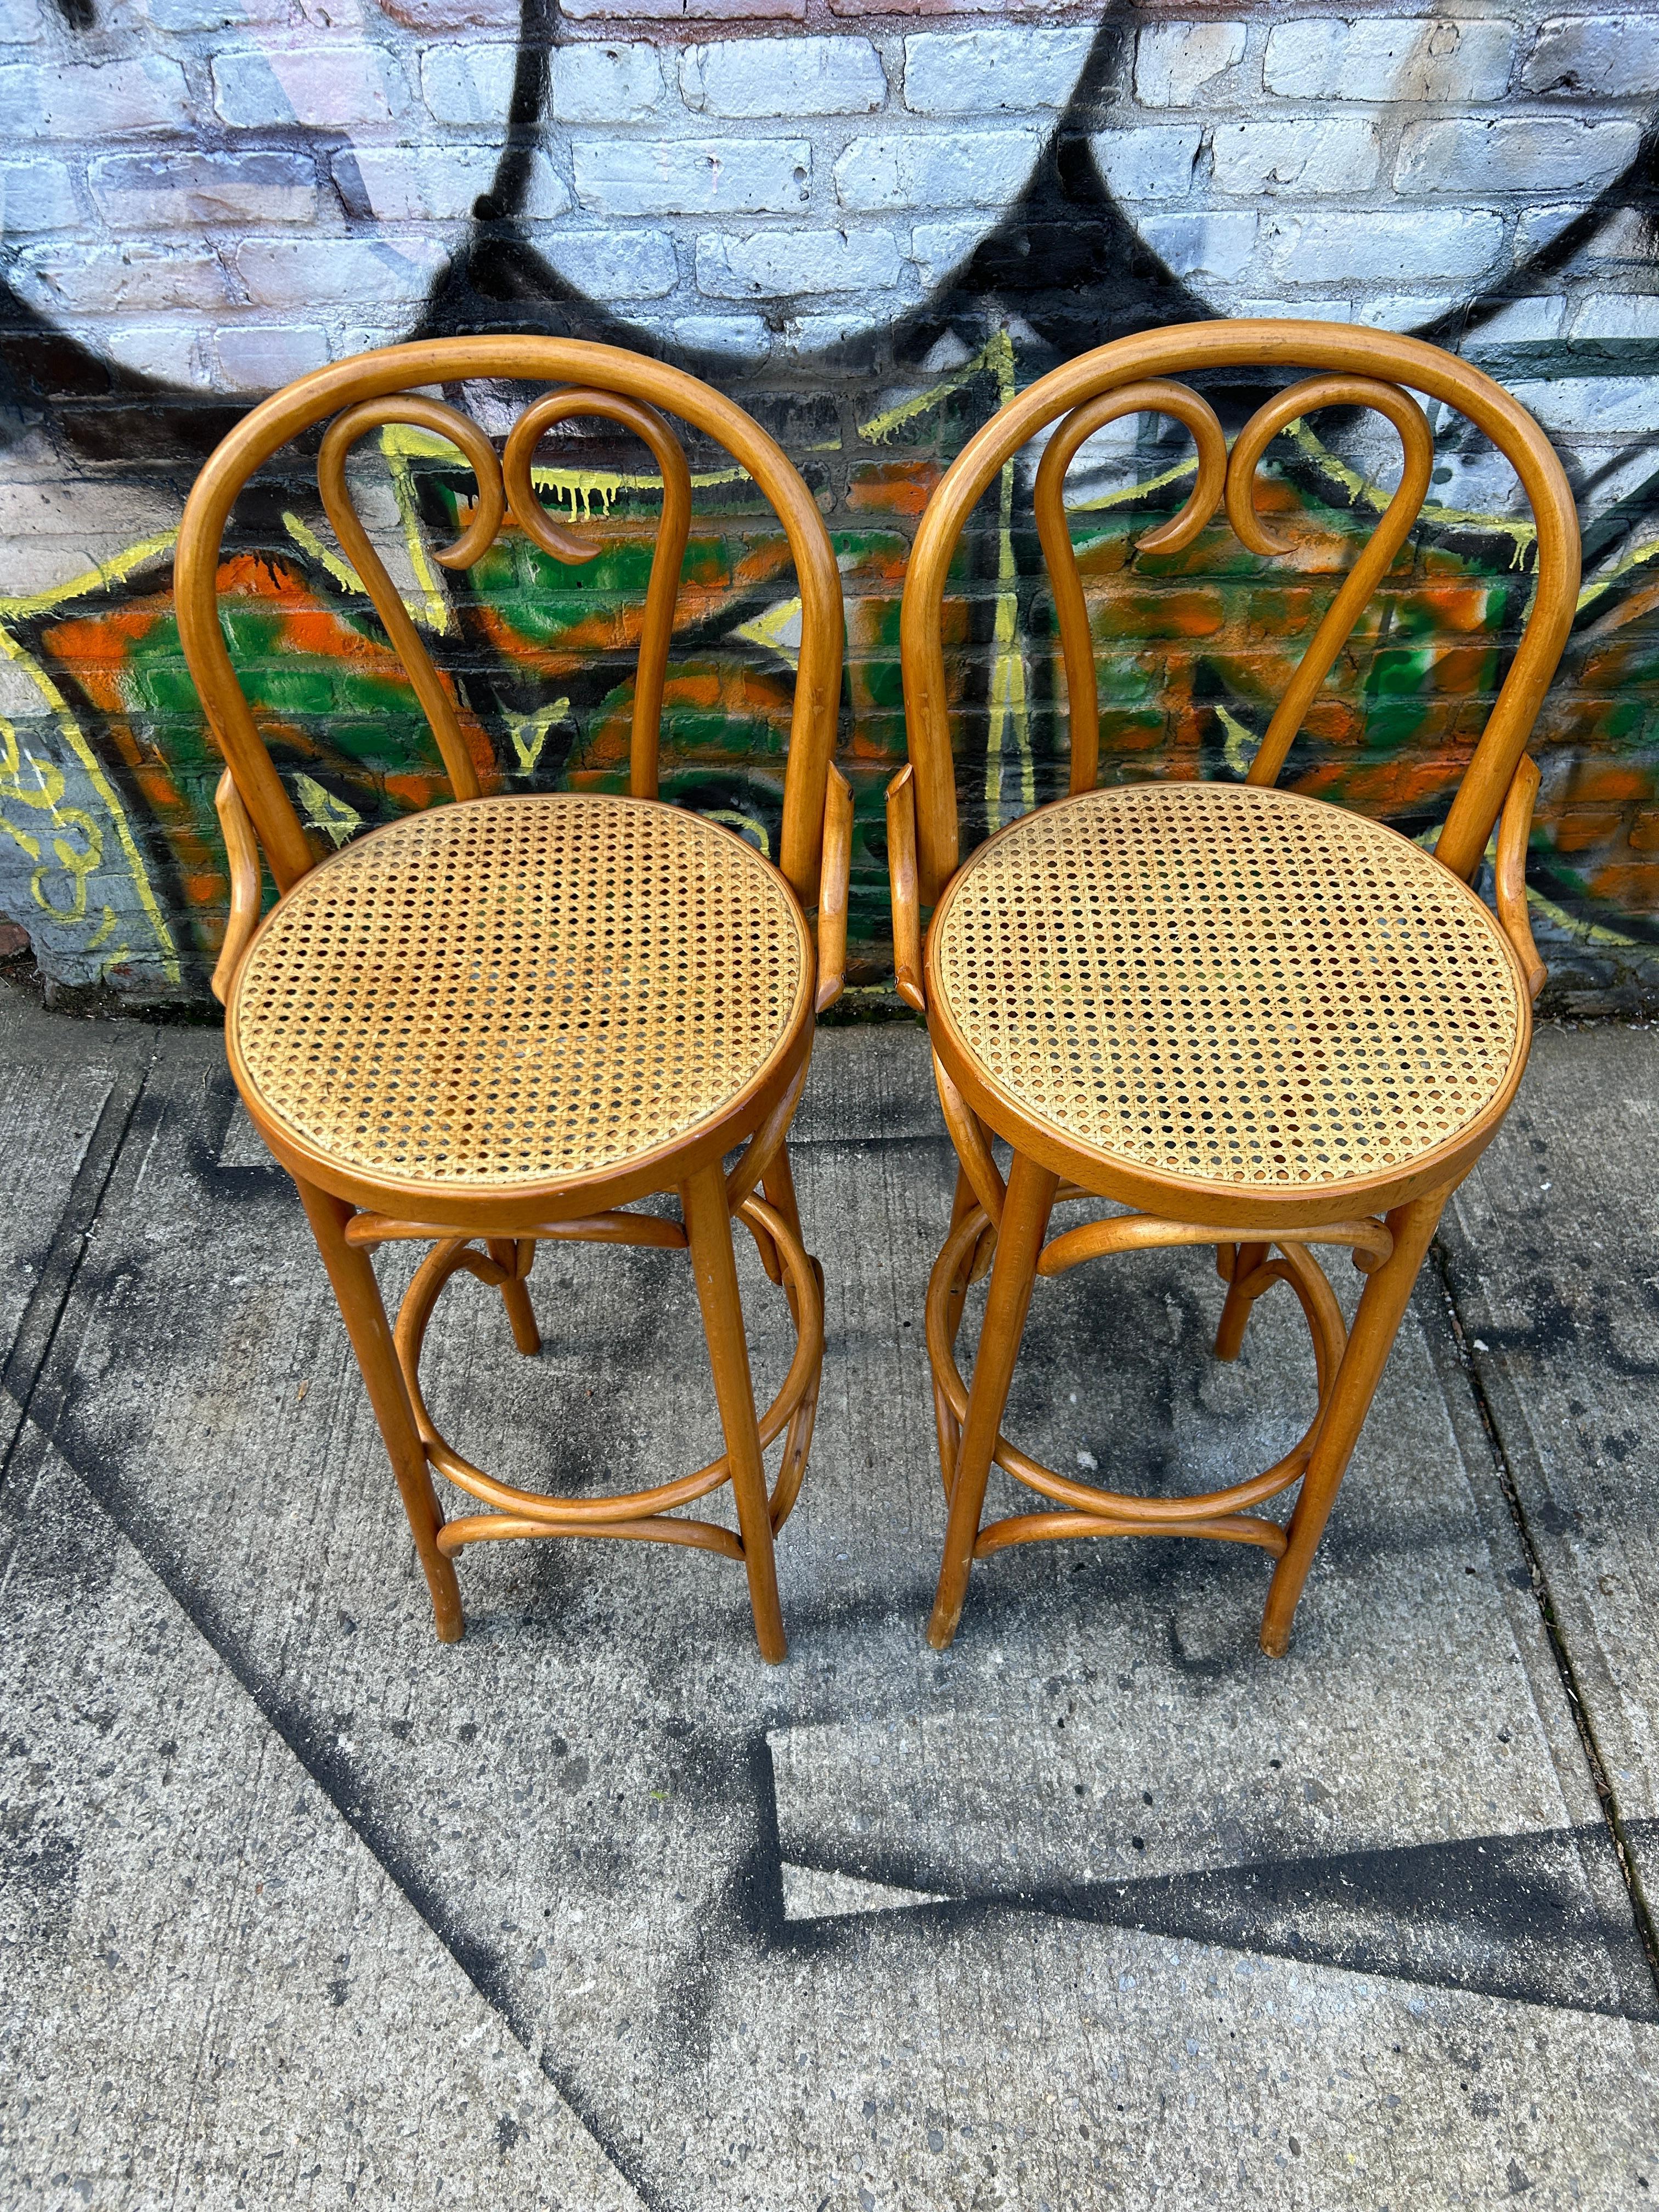 Midcentury cane round bar height stools by Thonet blonde bentwood with light cane. Seat height is 30” high. Great vintage condition. Cane is perfect on both stools. Very sturdy and ready for use. Located in Brooklyn NYC

Sold as 2 stools (1)